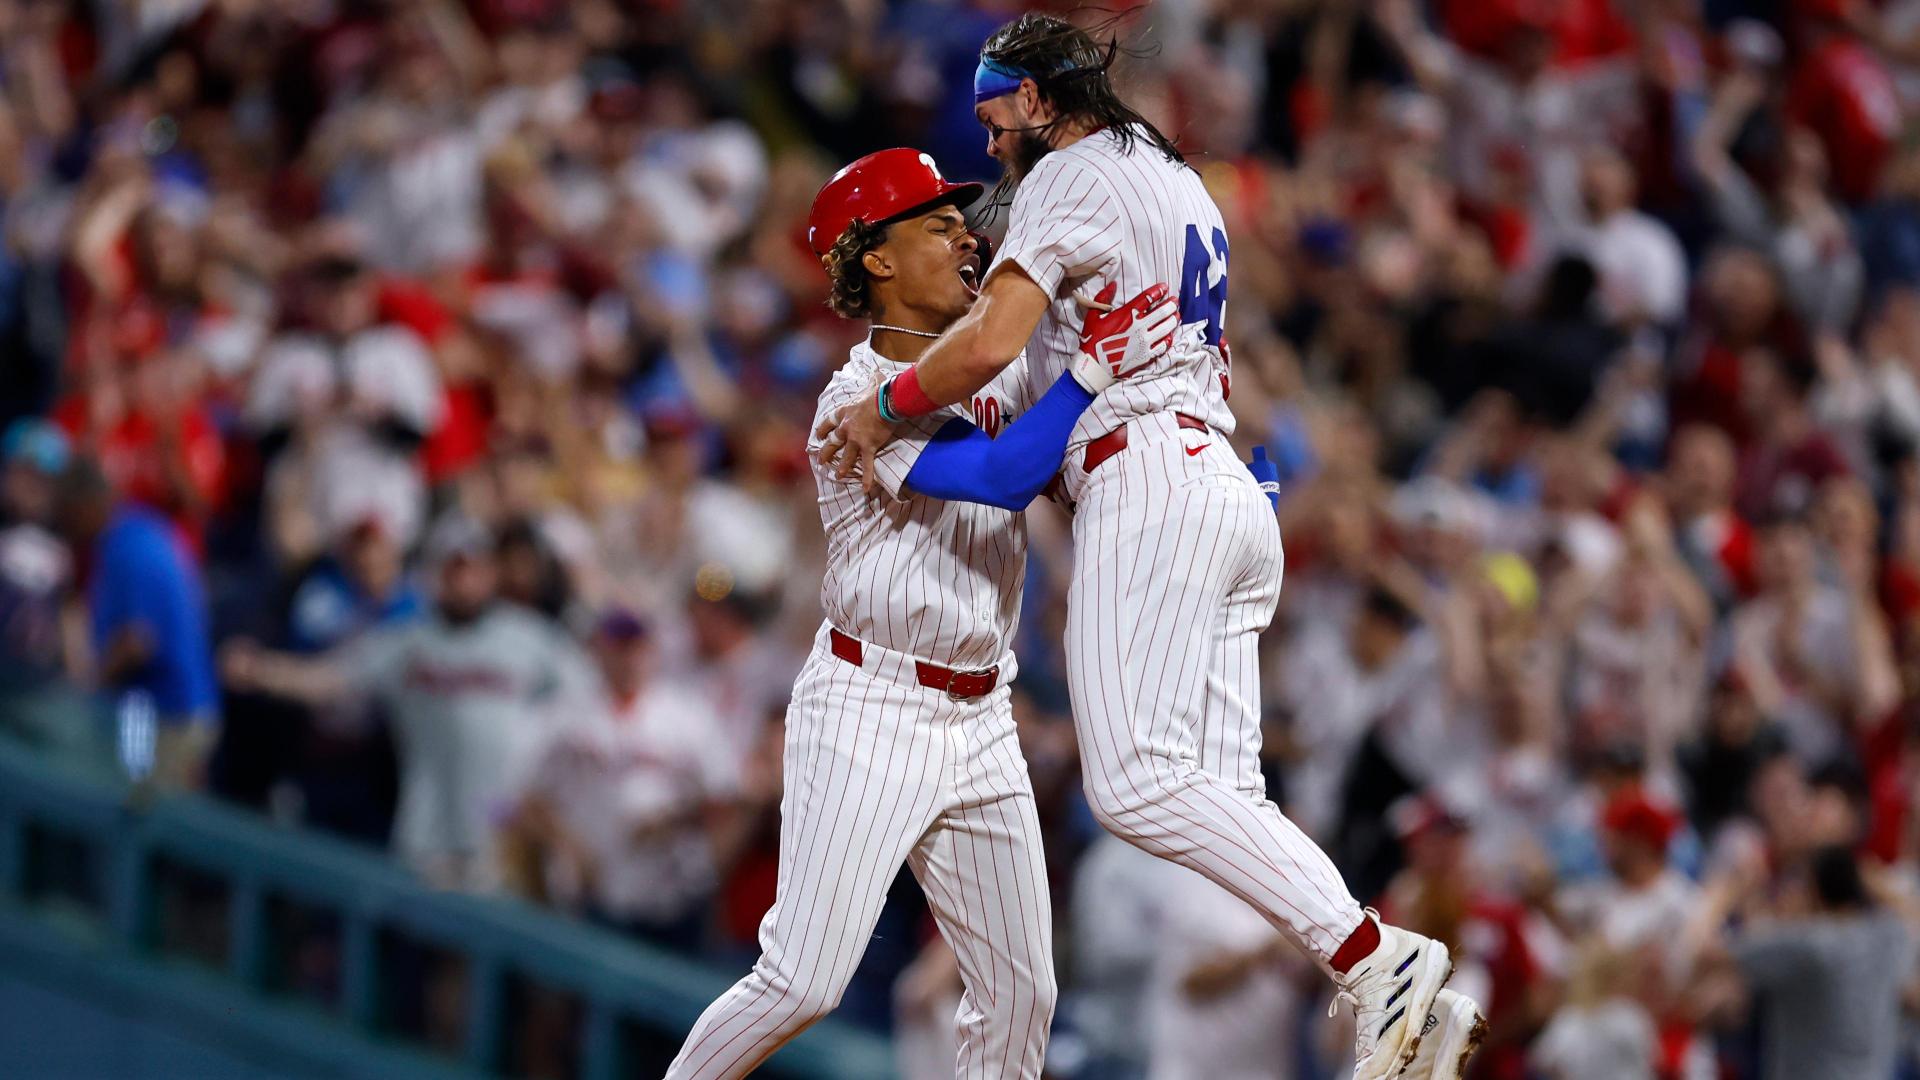 Pache s single  Harper s catch in 10th inning lift Phillies past Rockies